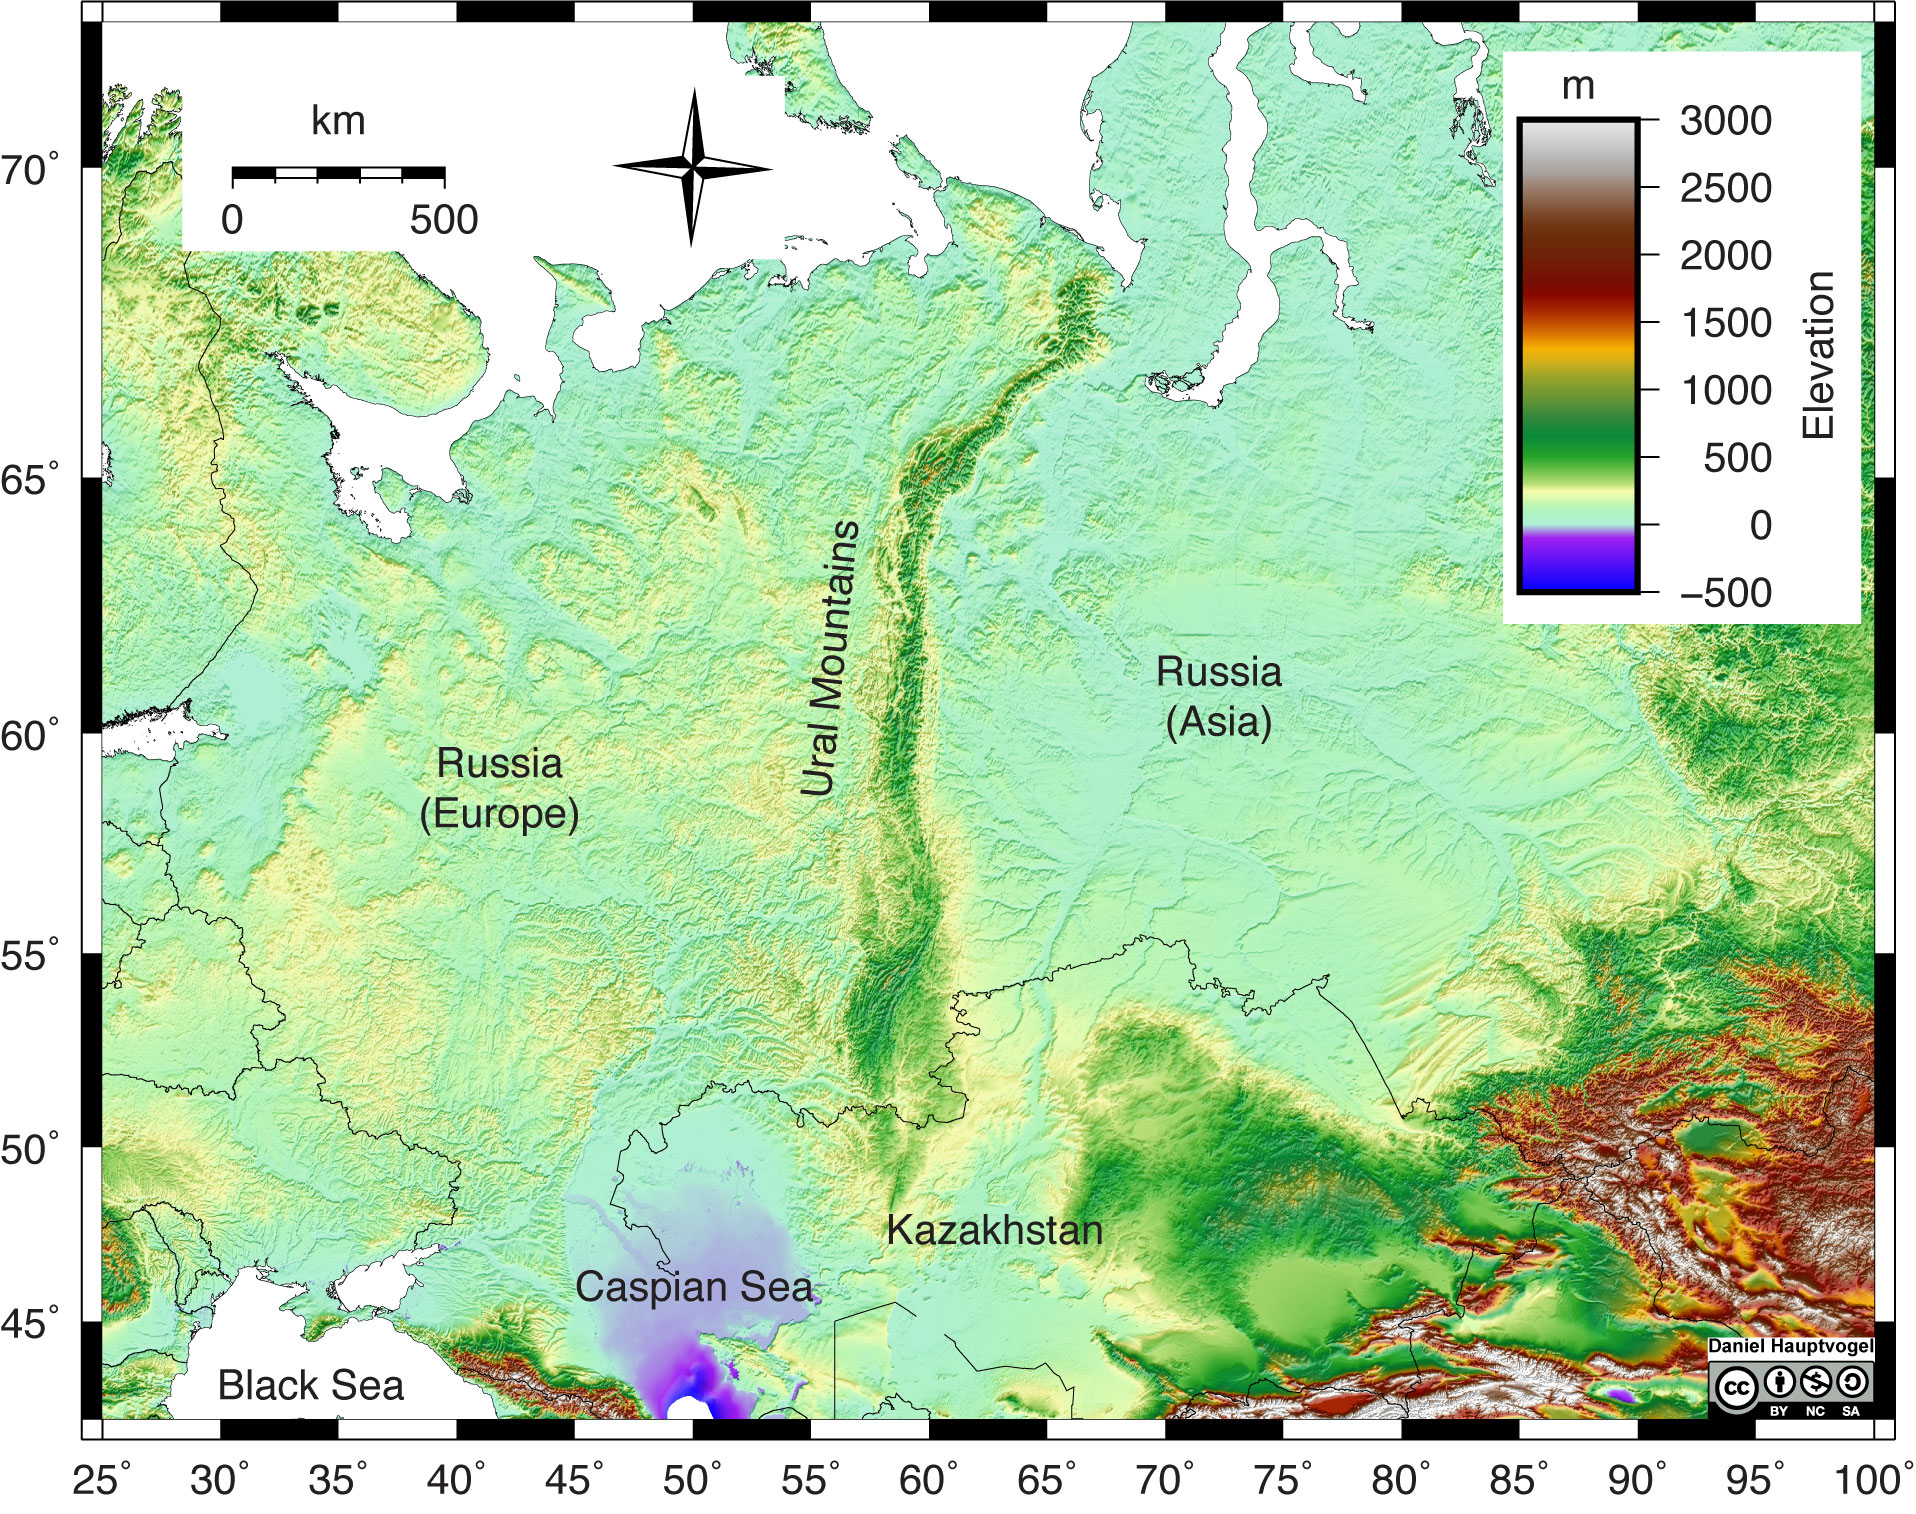 Shaded relief map of the Ural Mountains in Russia.